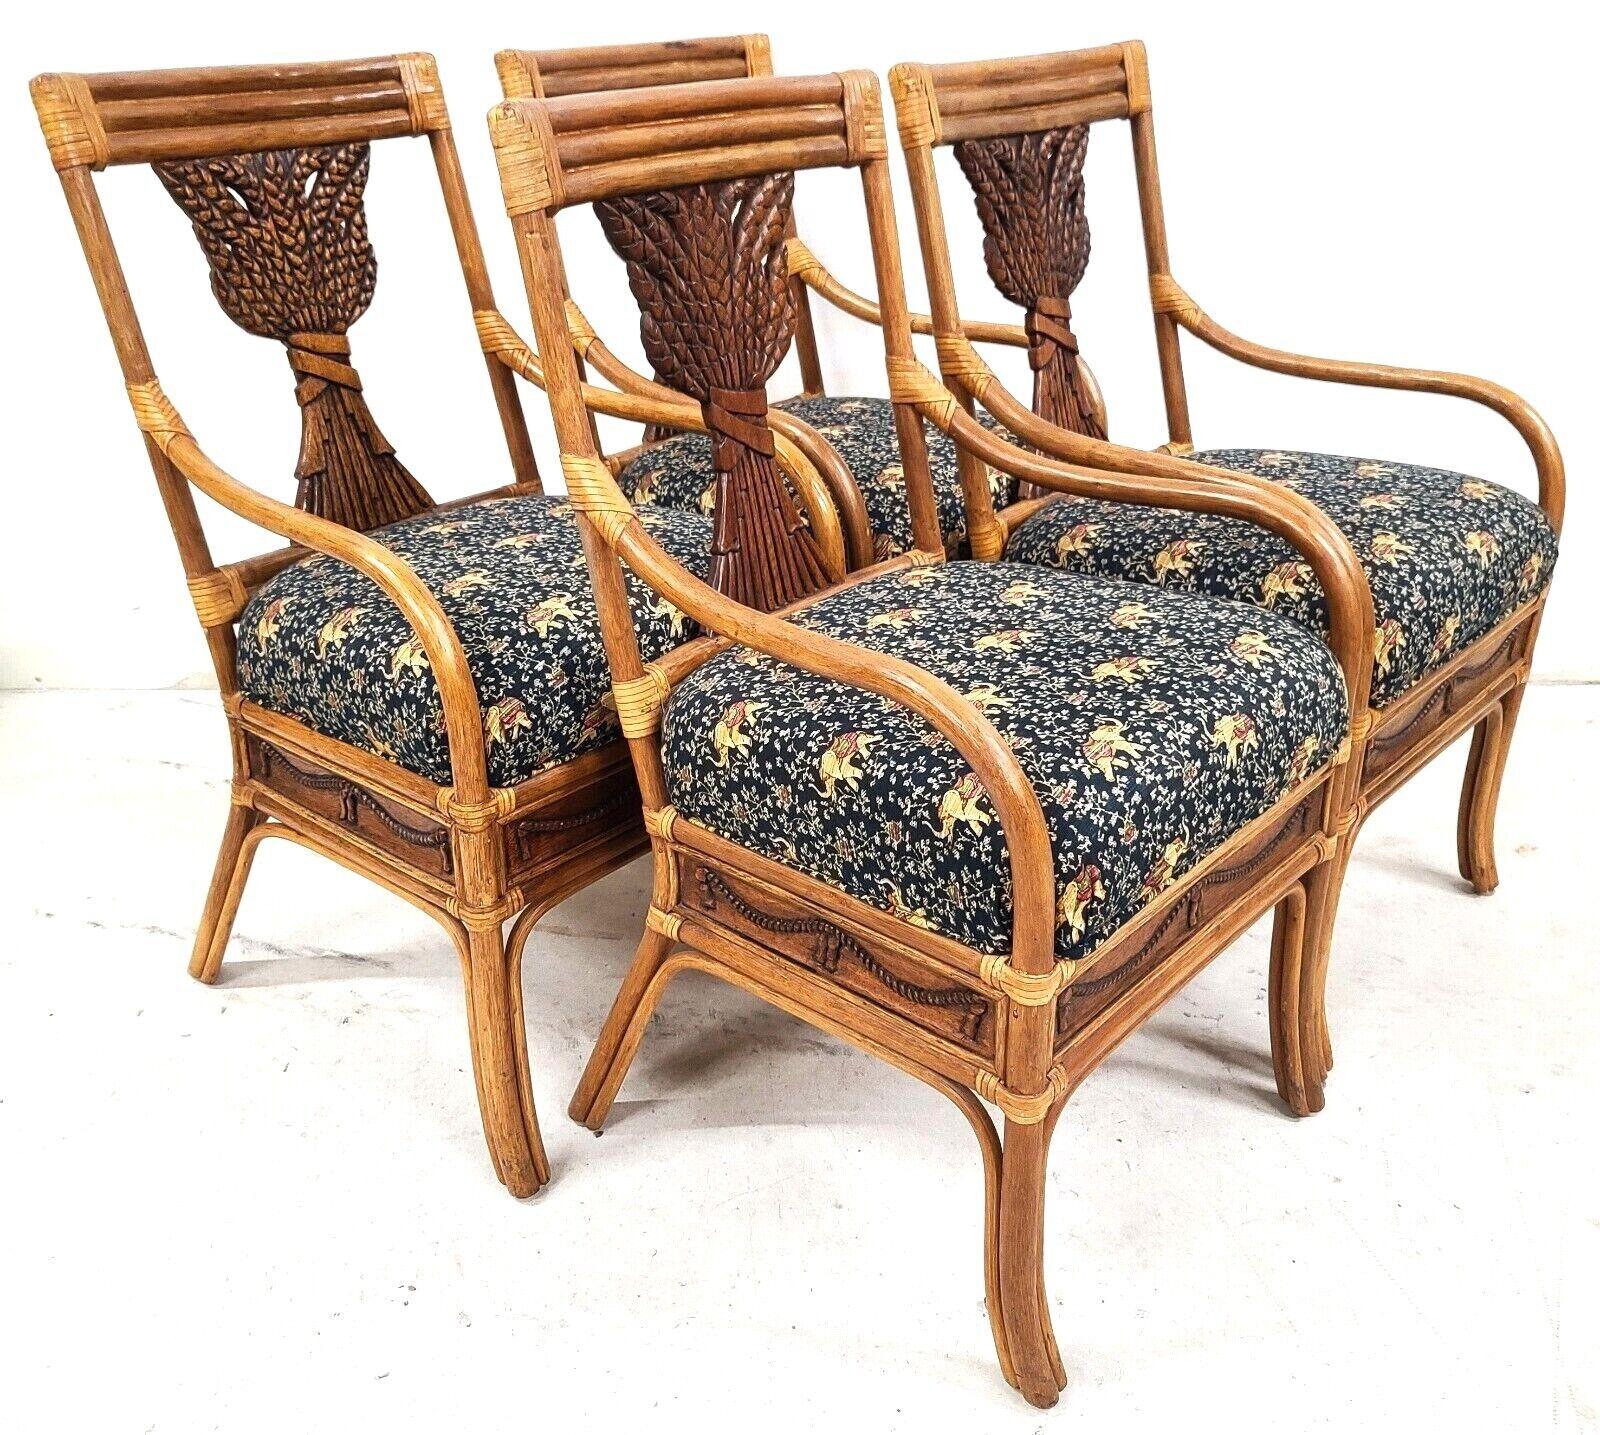 For full item description be sure to click on continue reading at the bottom of this listing.
Offering one of our recent palm beach estate fine furniture acquisitions of a
set of (4) vintage bamboo bentwood rattan wheat harvest splat back dining